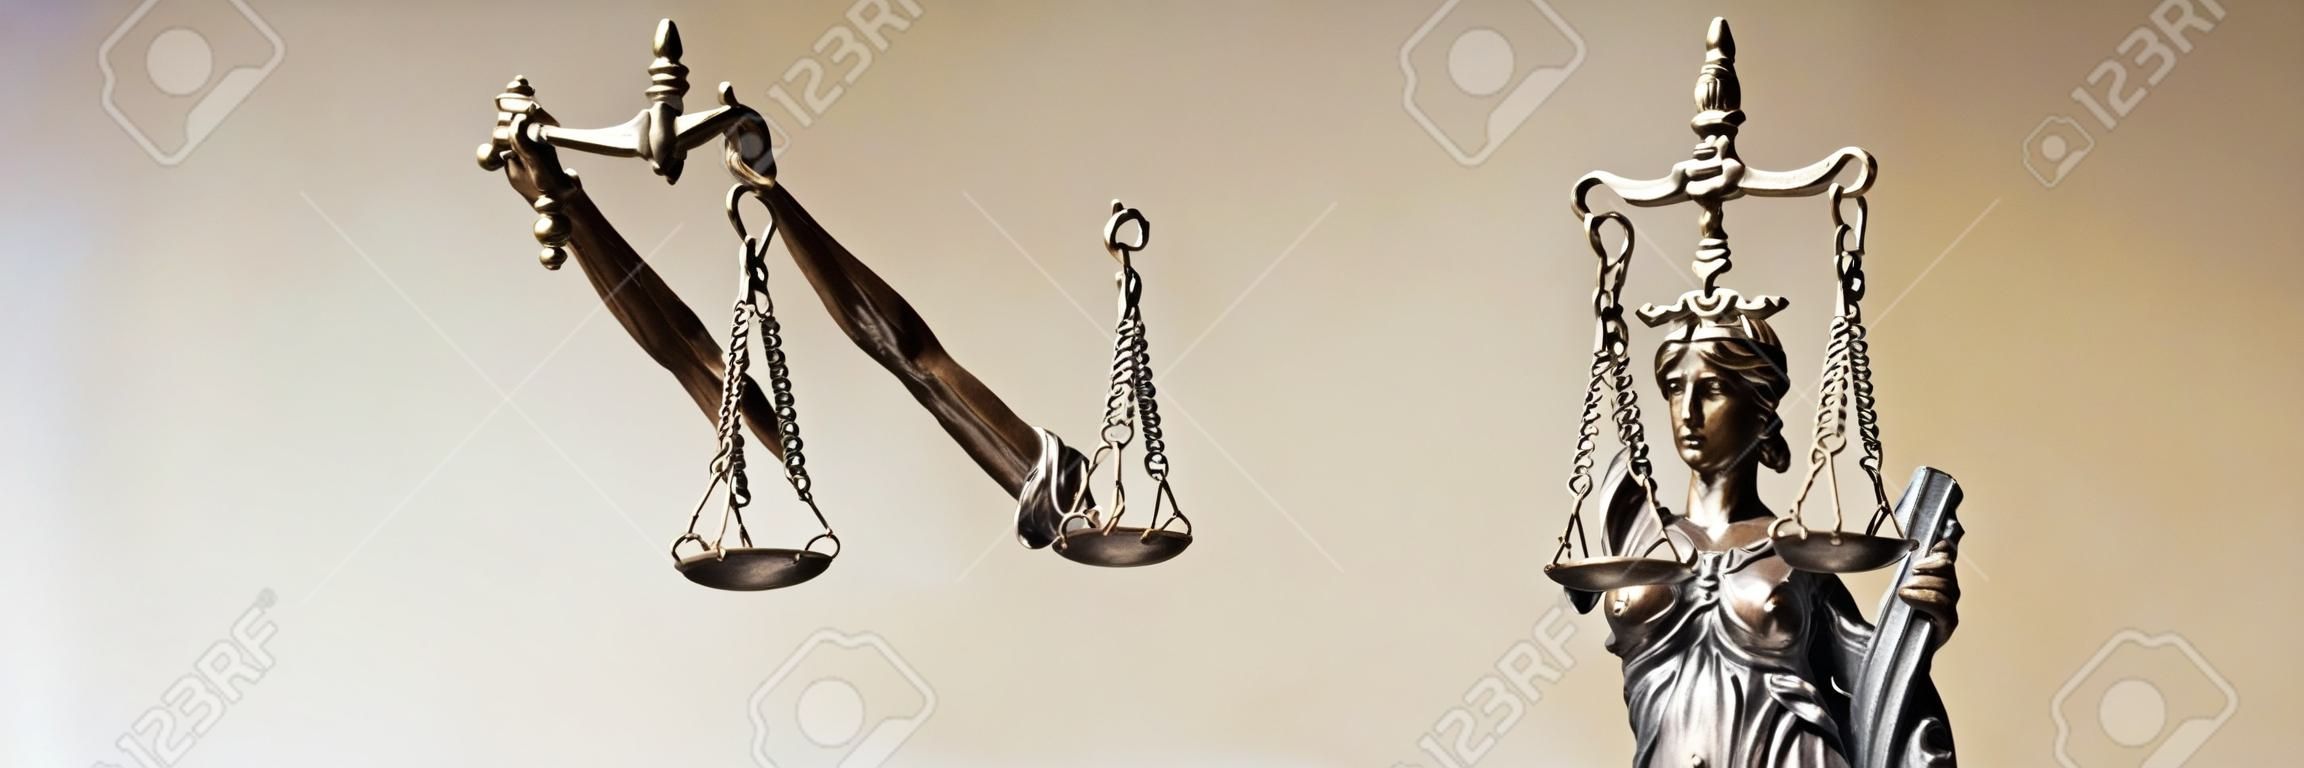 Concept of justice and law